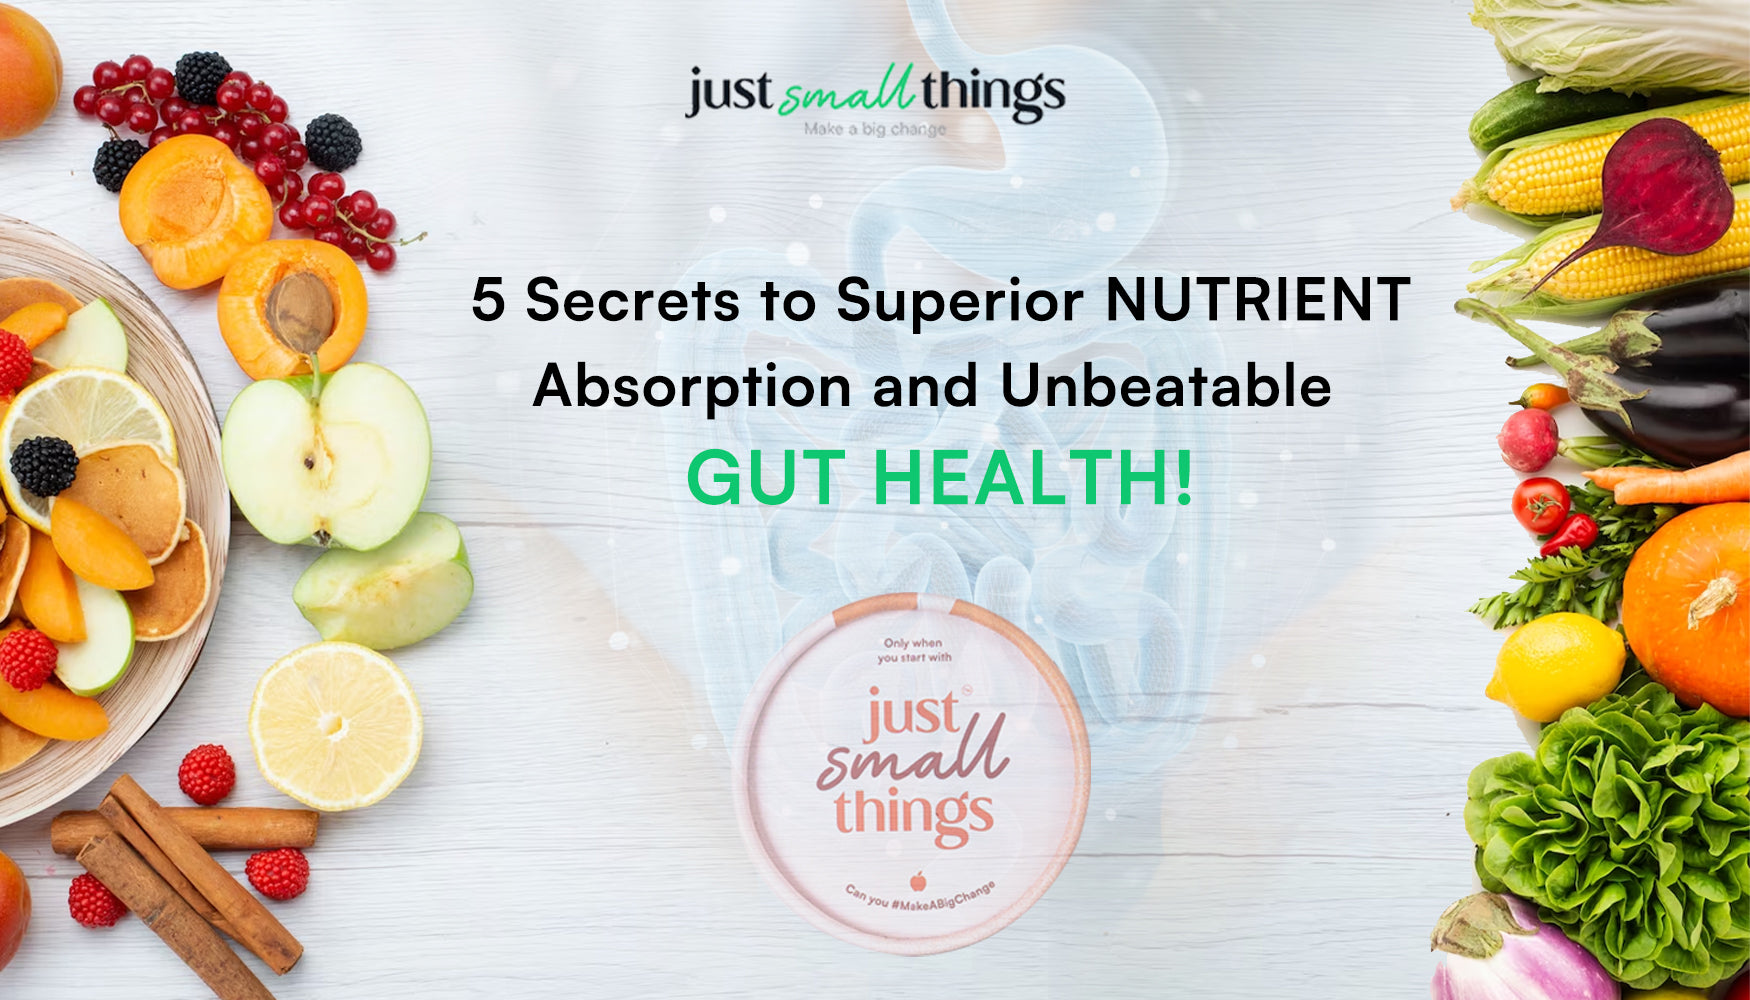 Gut health and nutrient absorption